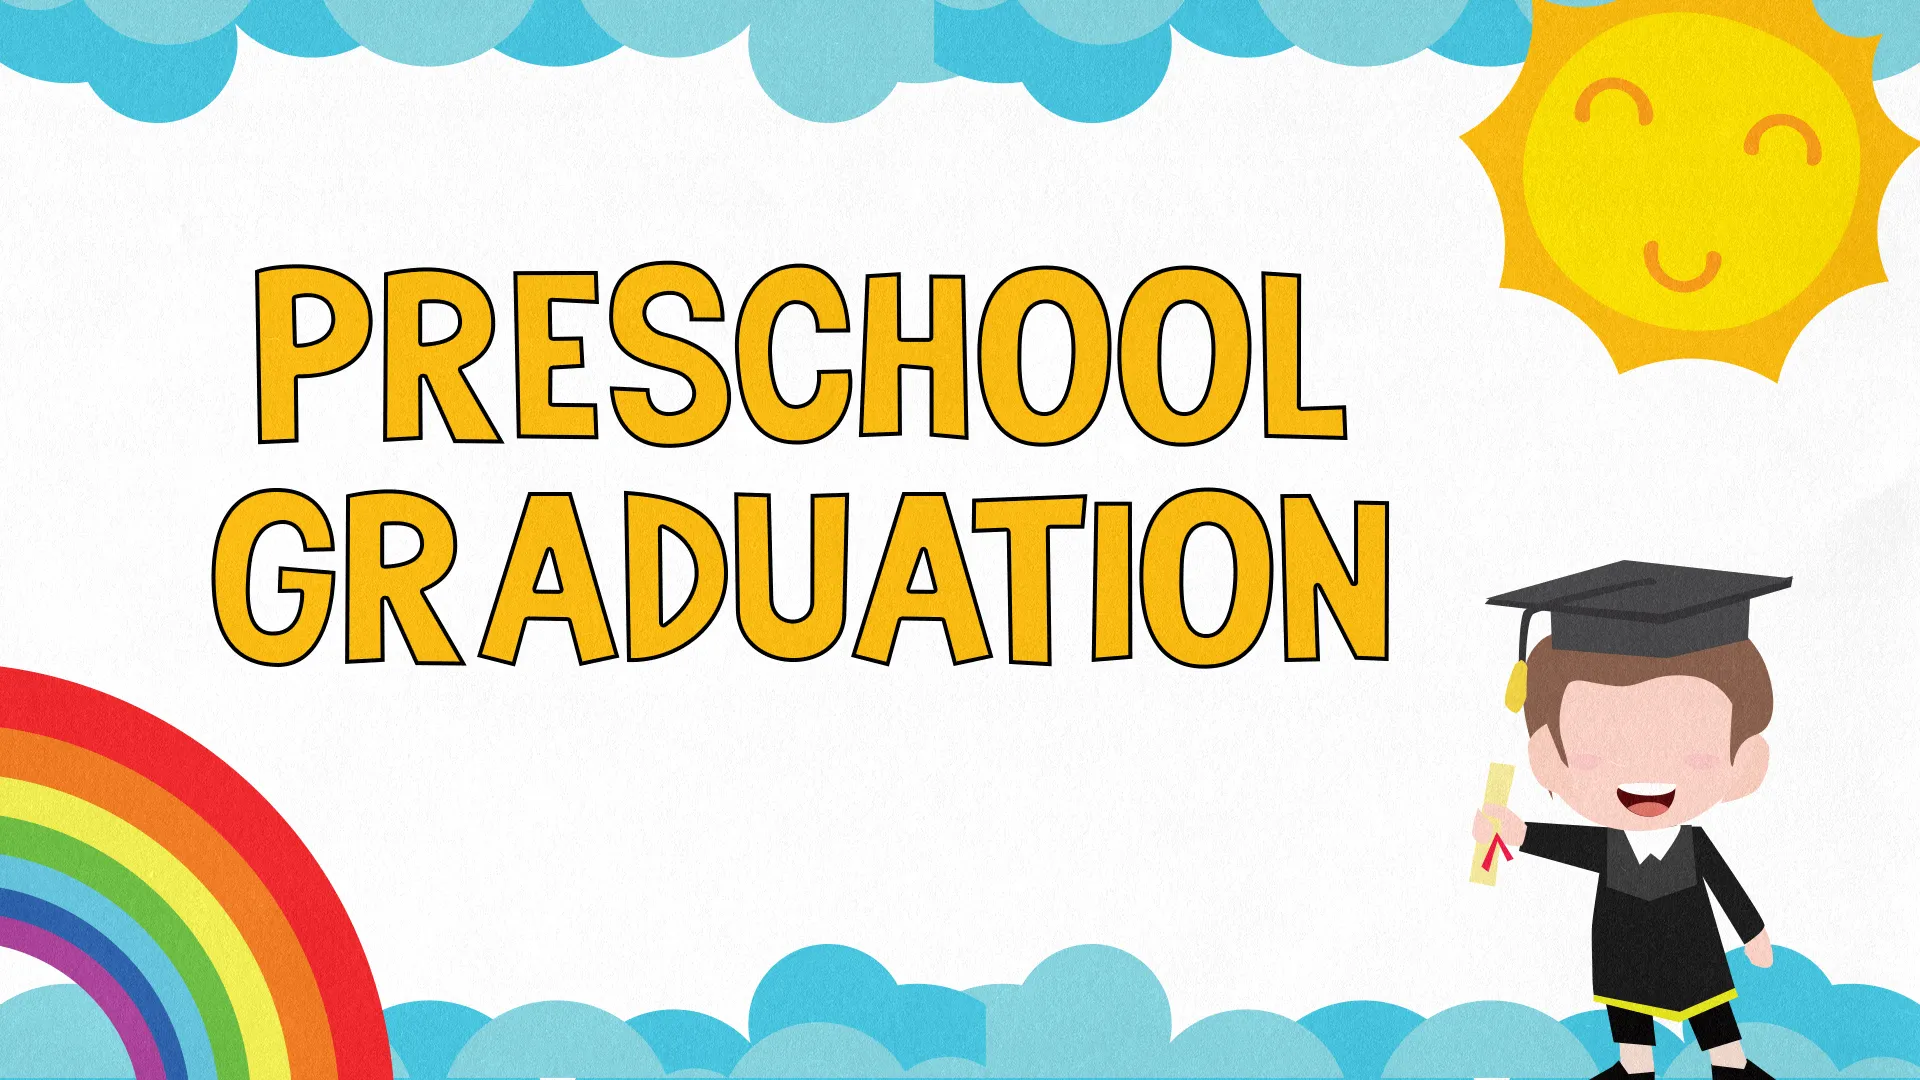 Celebrate the accomplishments of your little graduates with this adorable "Preschool Graduation" graphic. Featuring cheerful illustrations of a rainbow, sun, and a graduating child, it perfectly captures the joy and innocence of this special milestone.